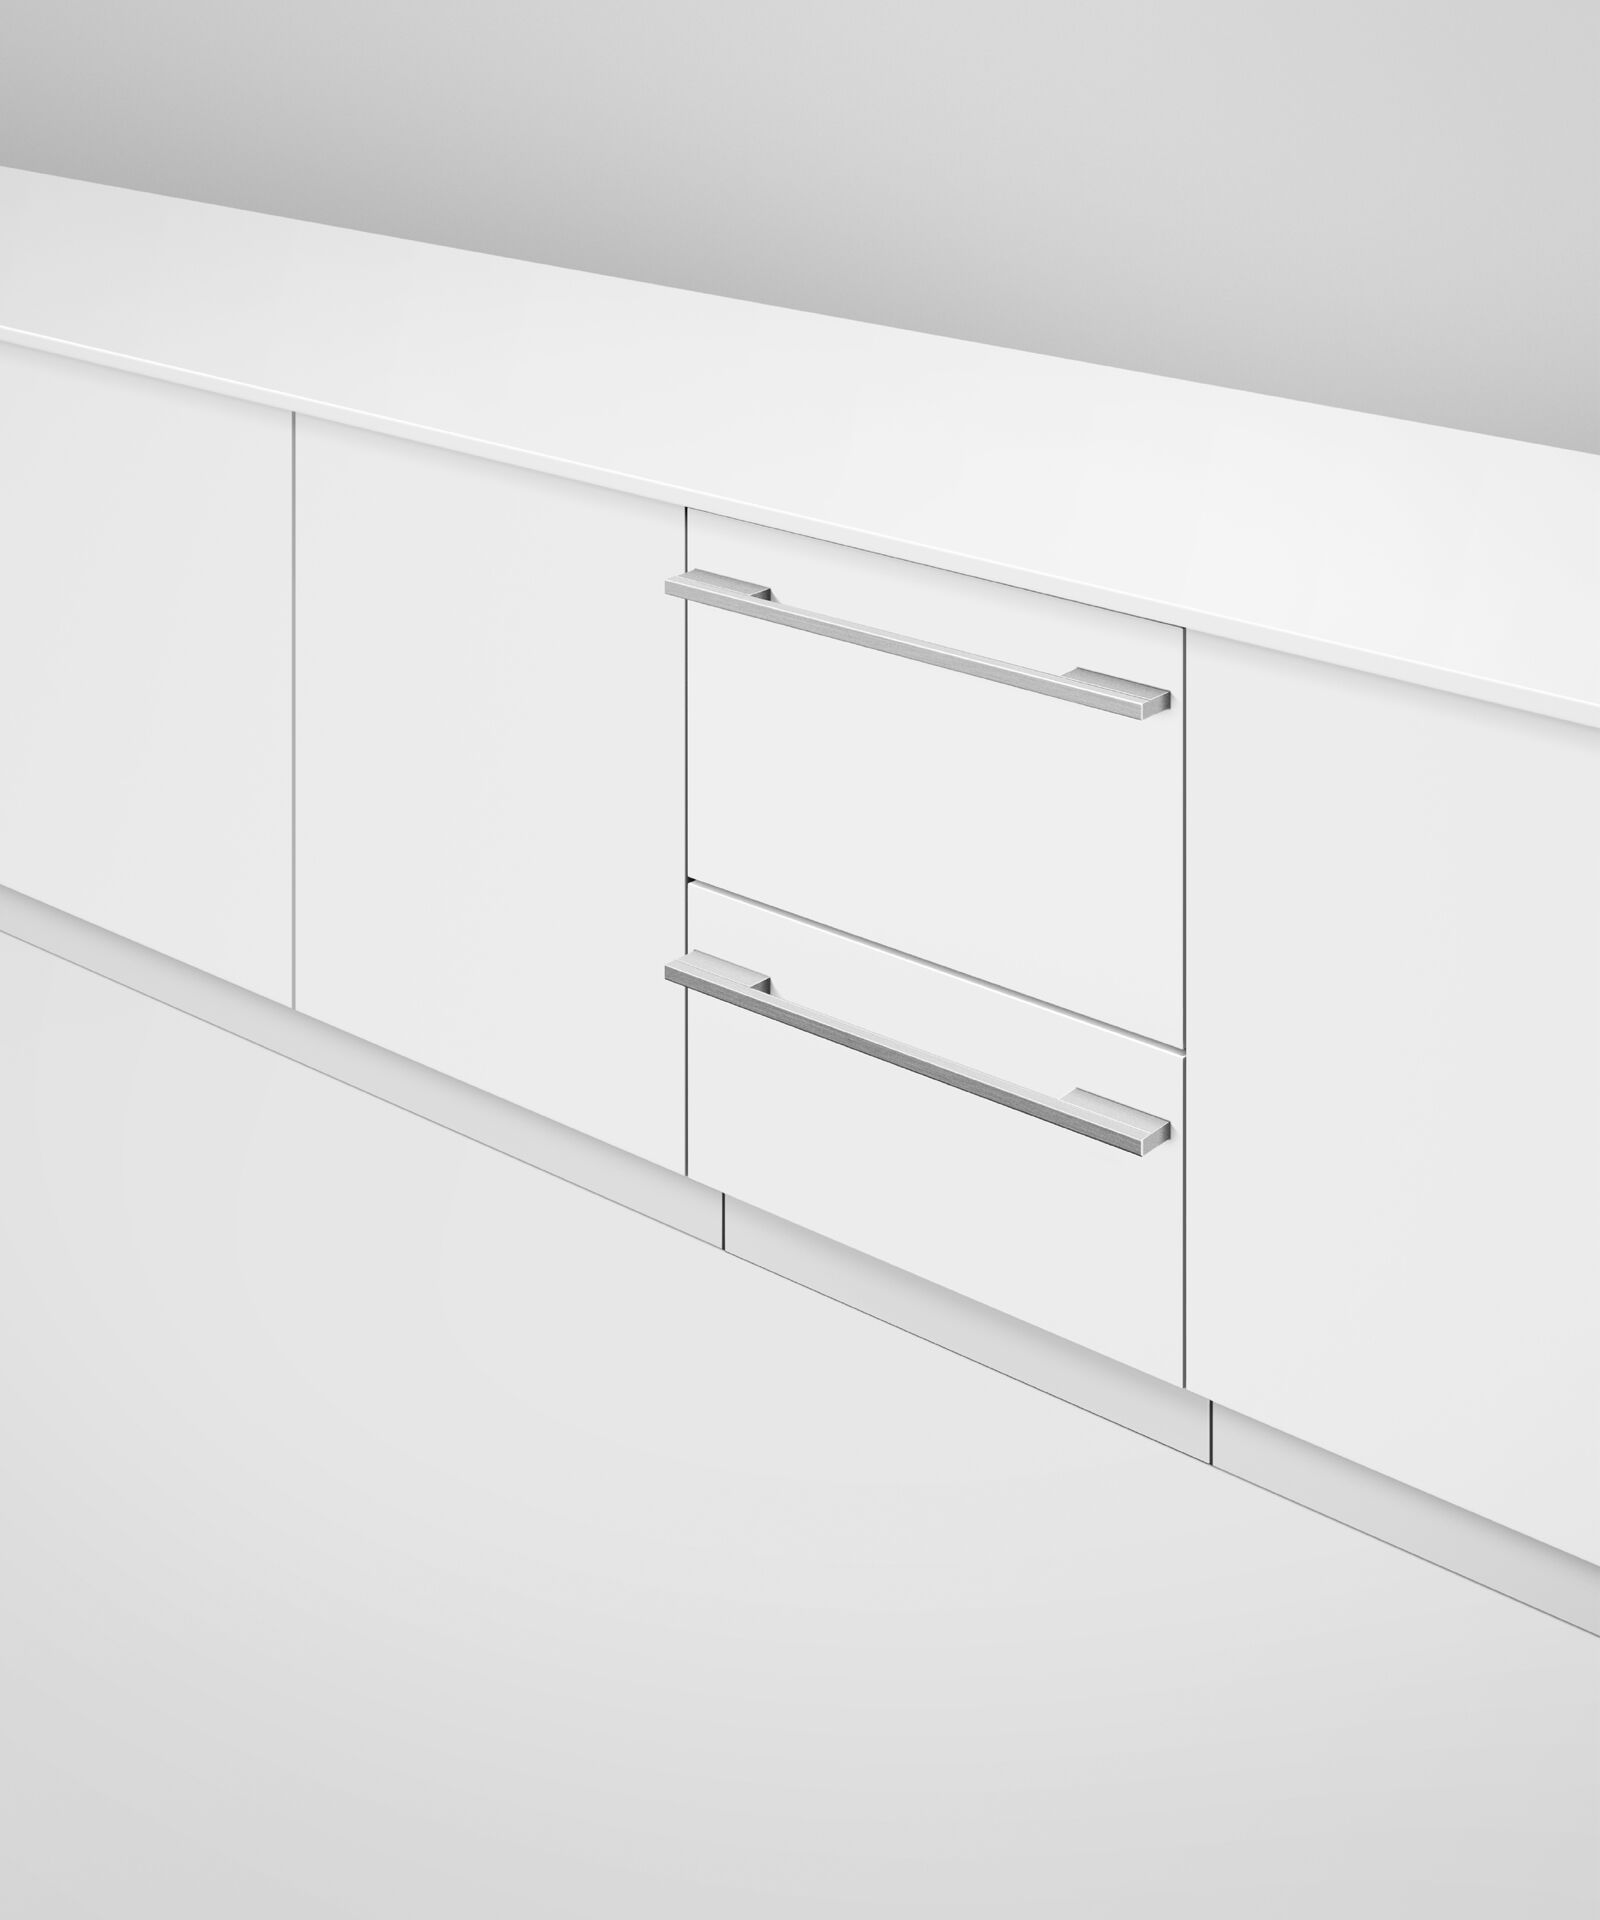 Integrated Double DishDrawer™ Dishwasher gallery image 5.0